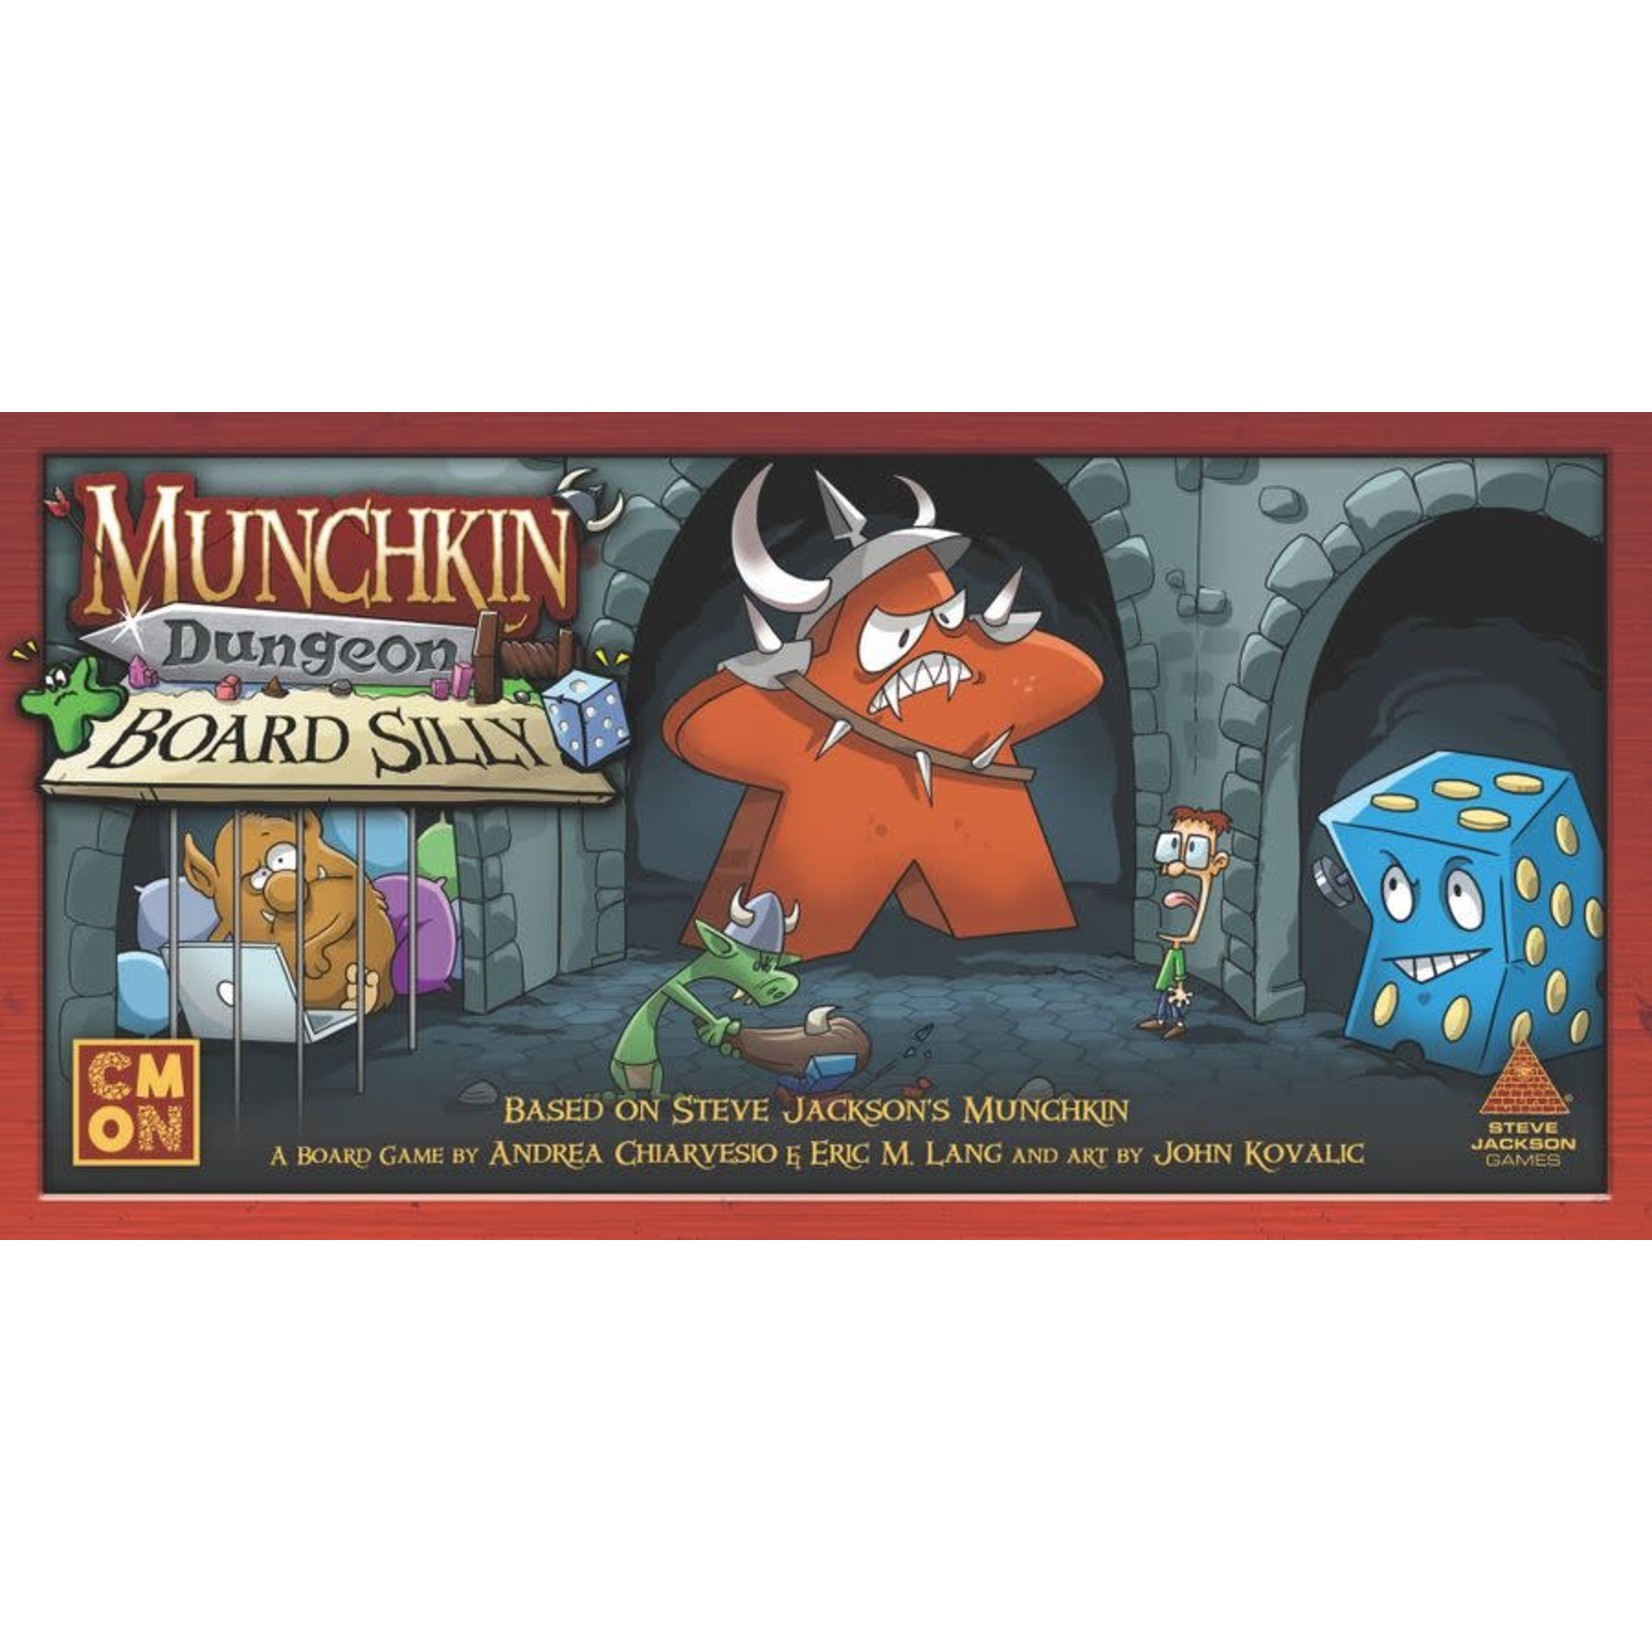 Cool Mini or Not Munchkin Dungeon: Board Silly